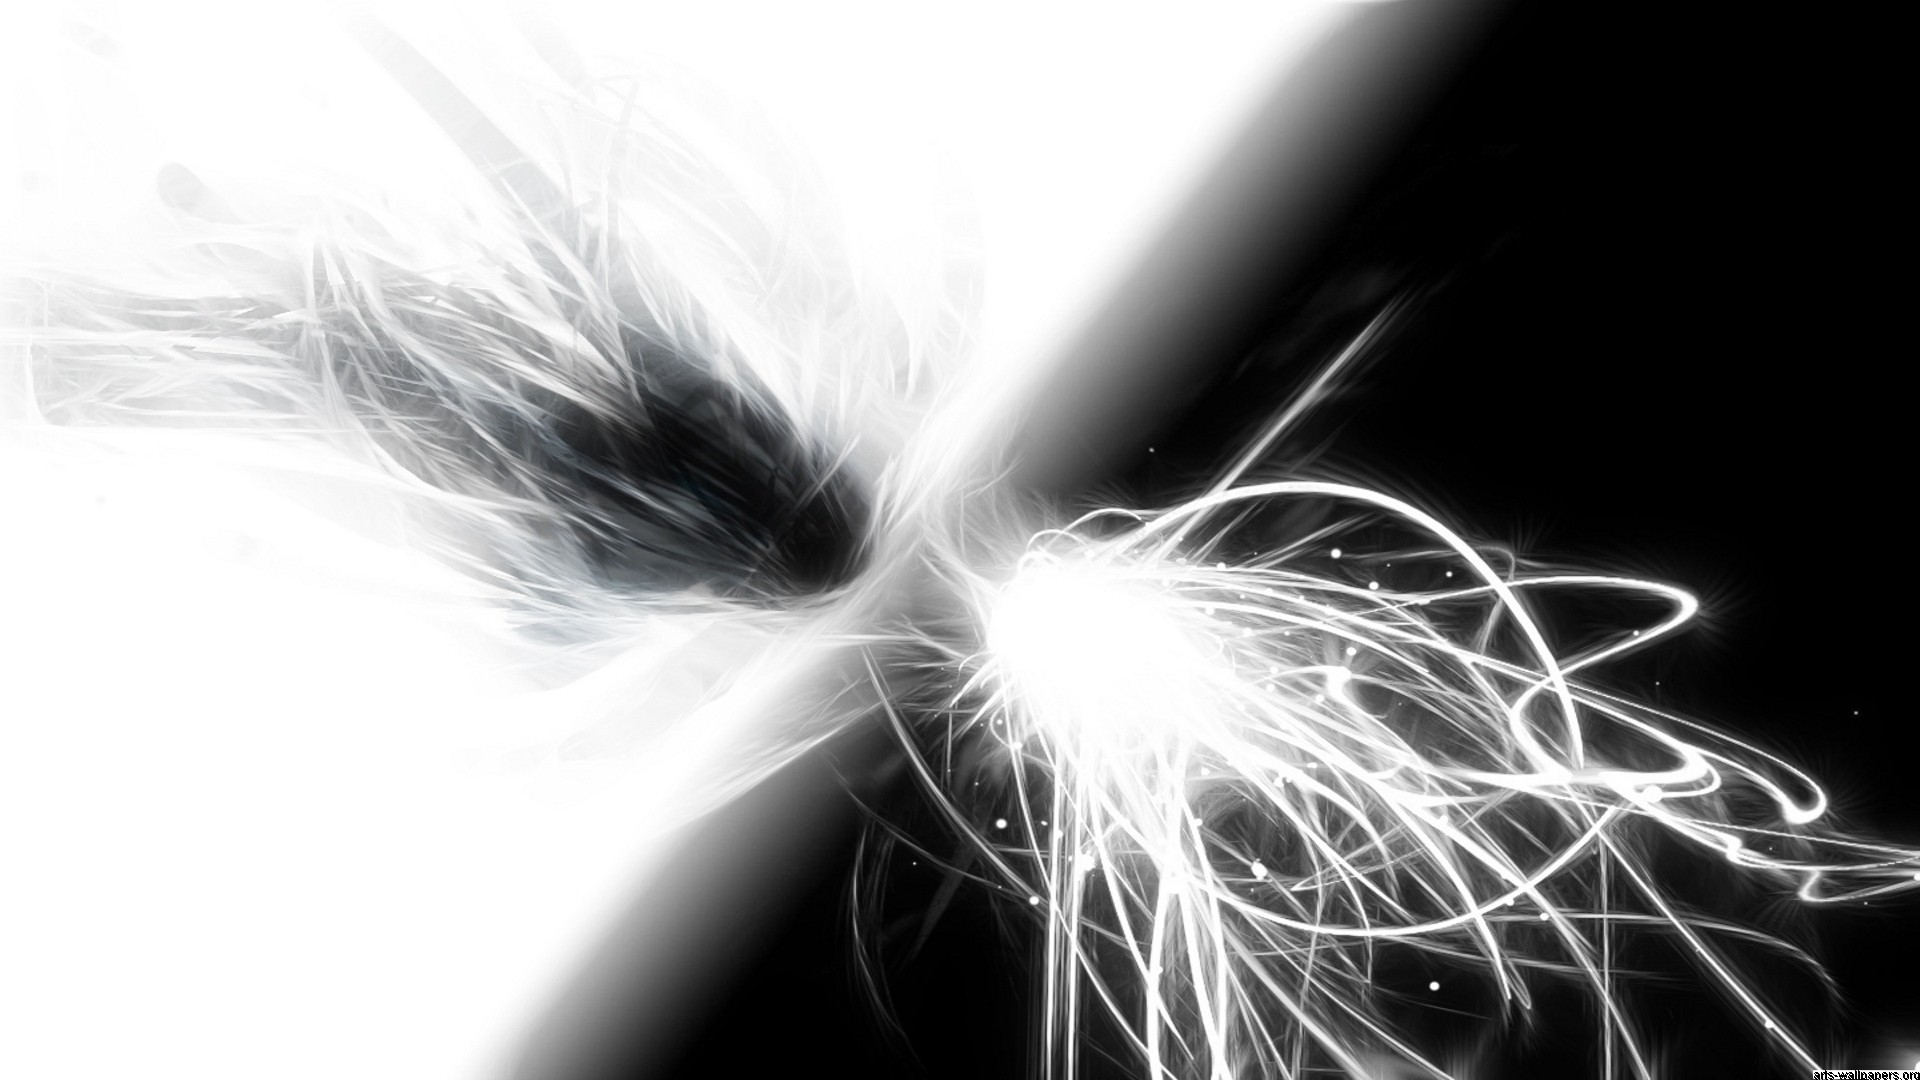 1920x1080 Black And White Abstract Drawings 2 Cool Hd Wallpaper